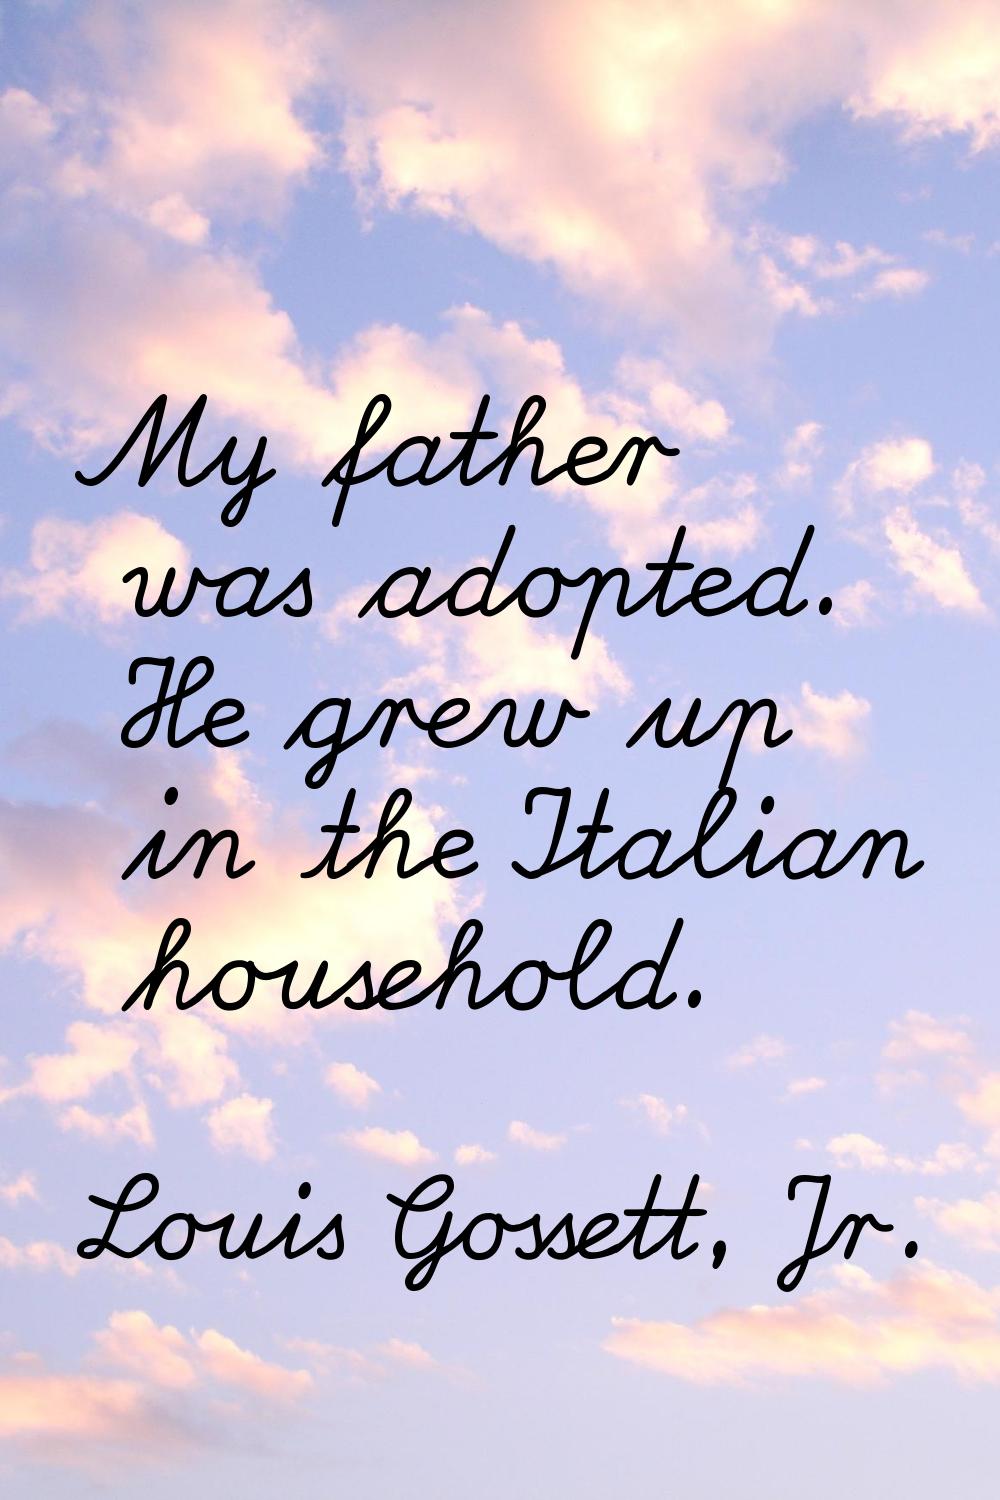 My father was adopted. He grew up in the Italian household.